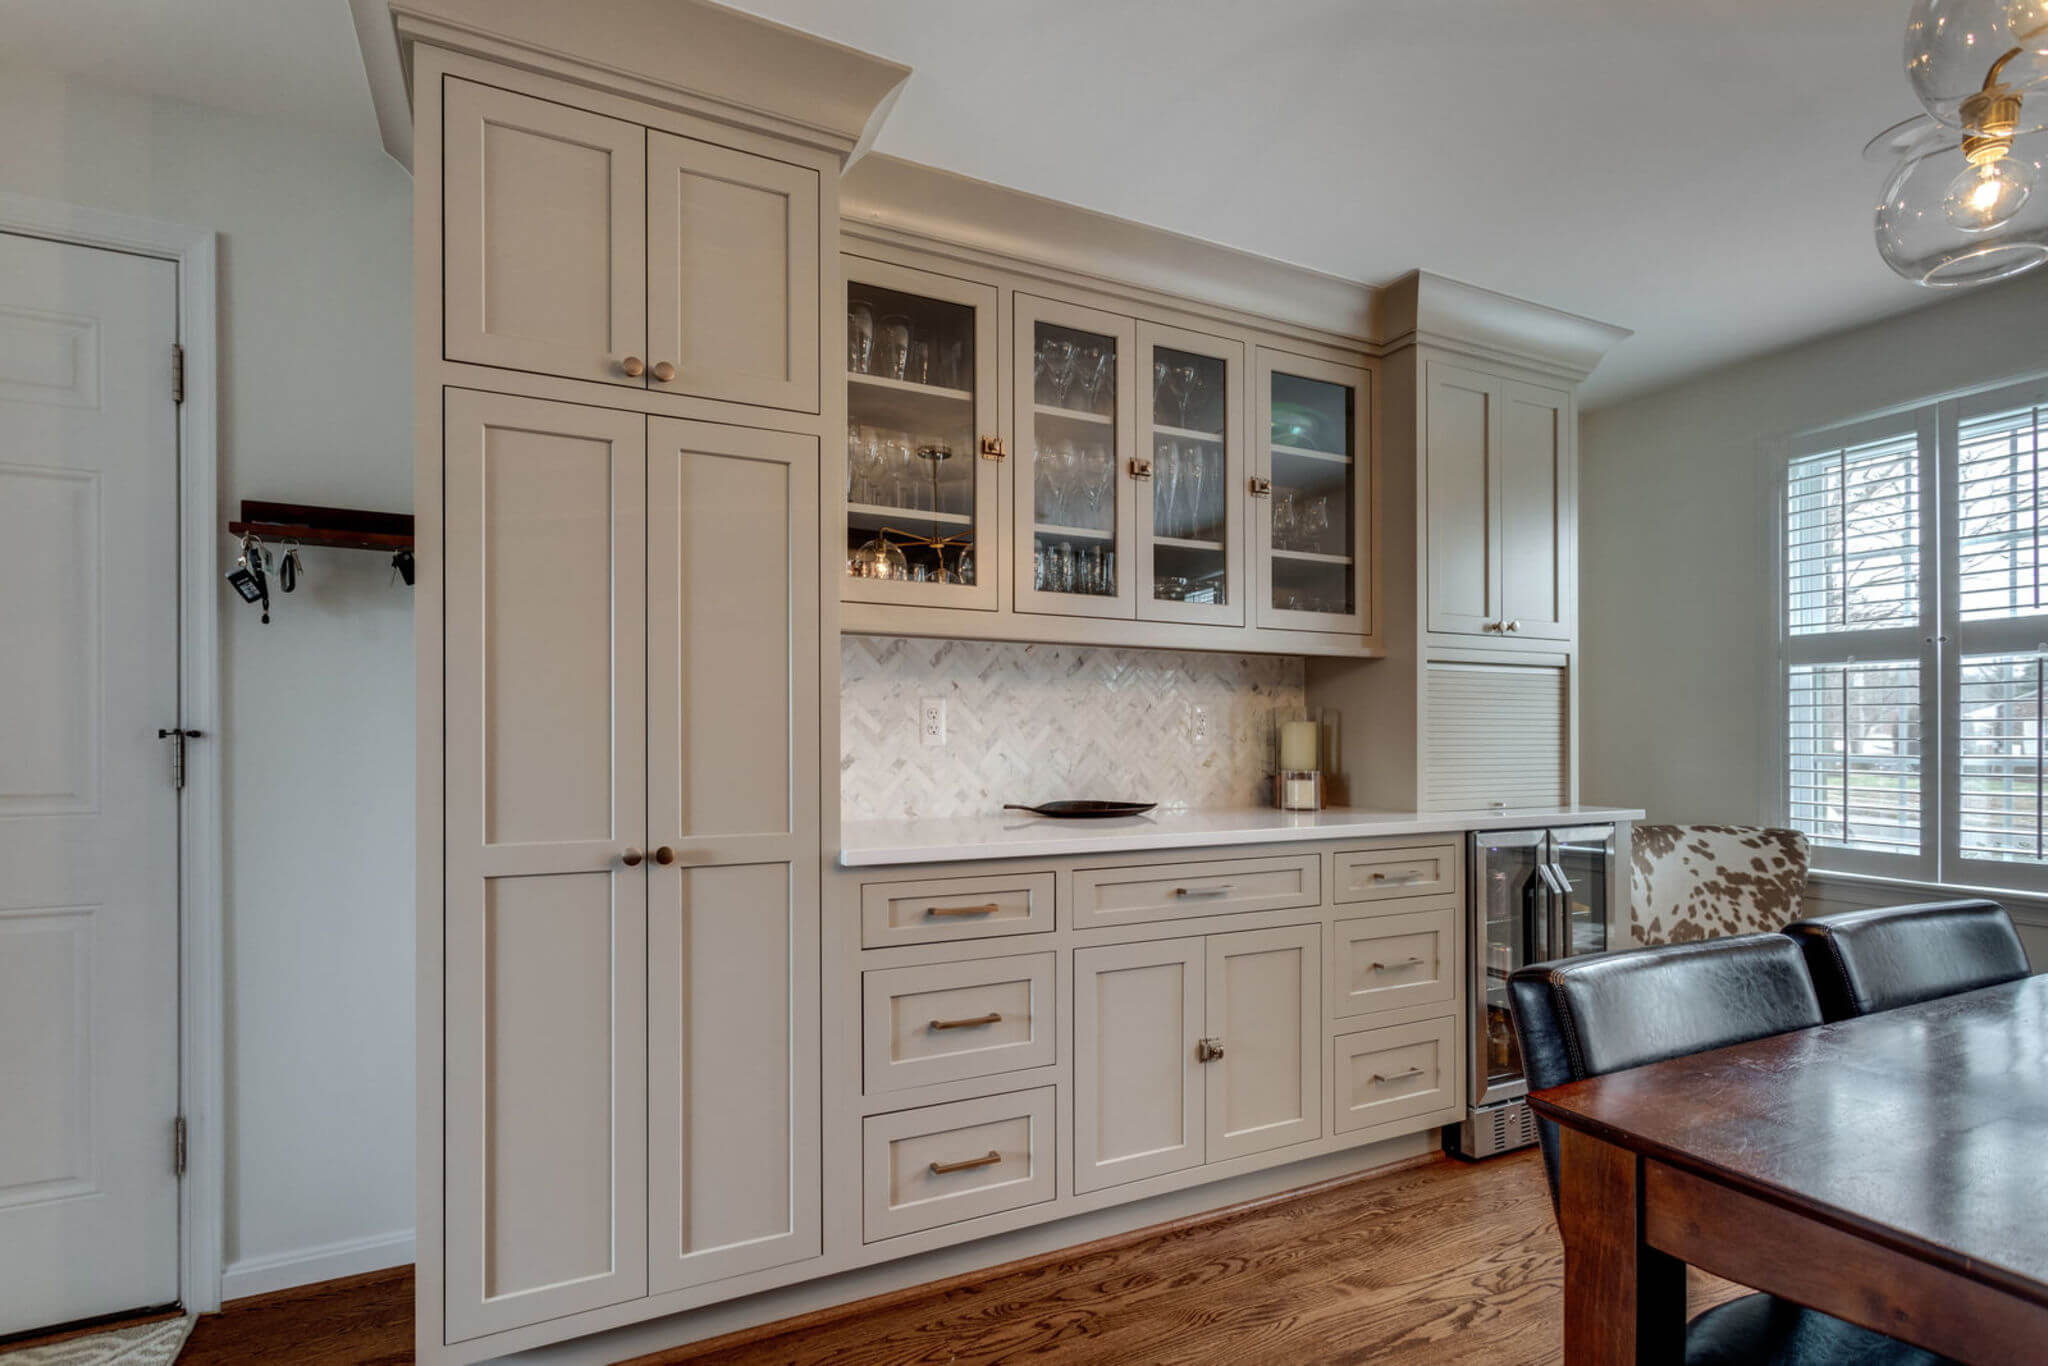 A hutch-like area of the dining room with built-in cabinetry with a beautiful painted finish in Dura Supreme's Putty paint color.